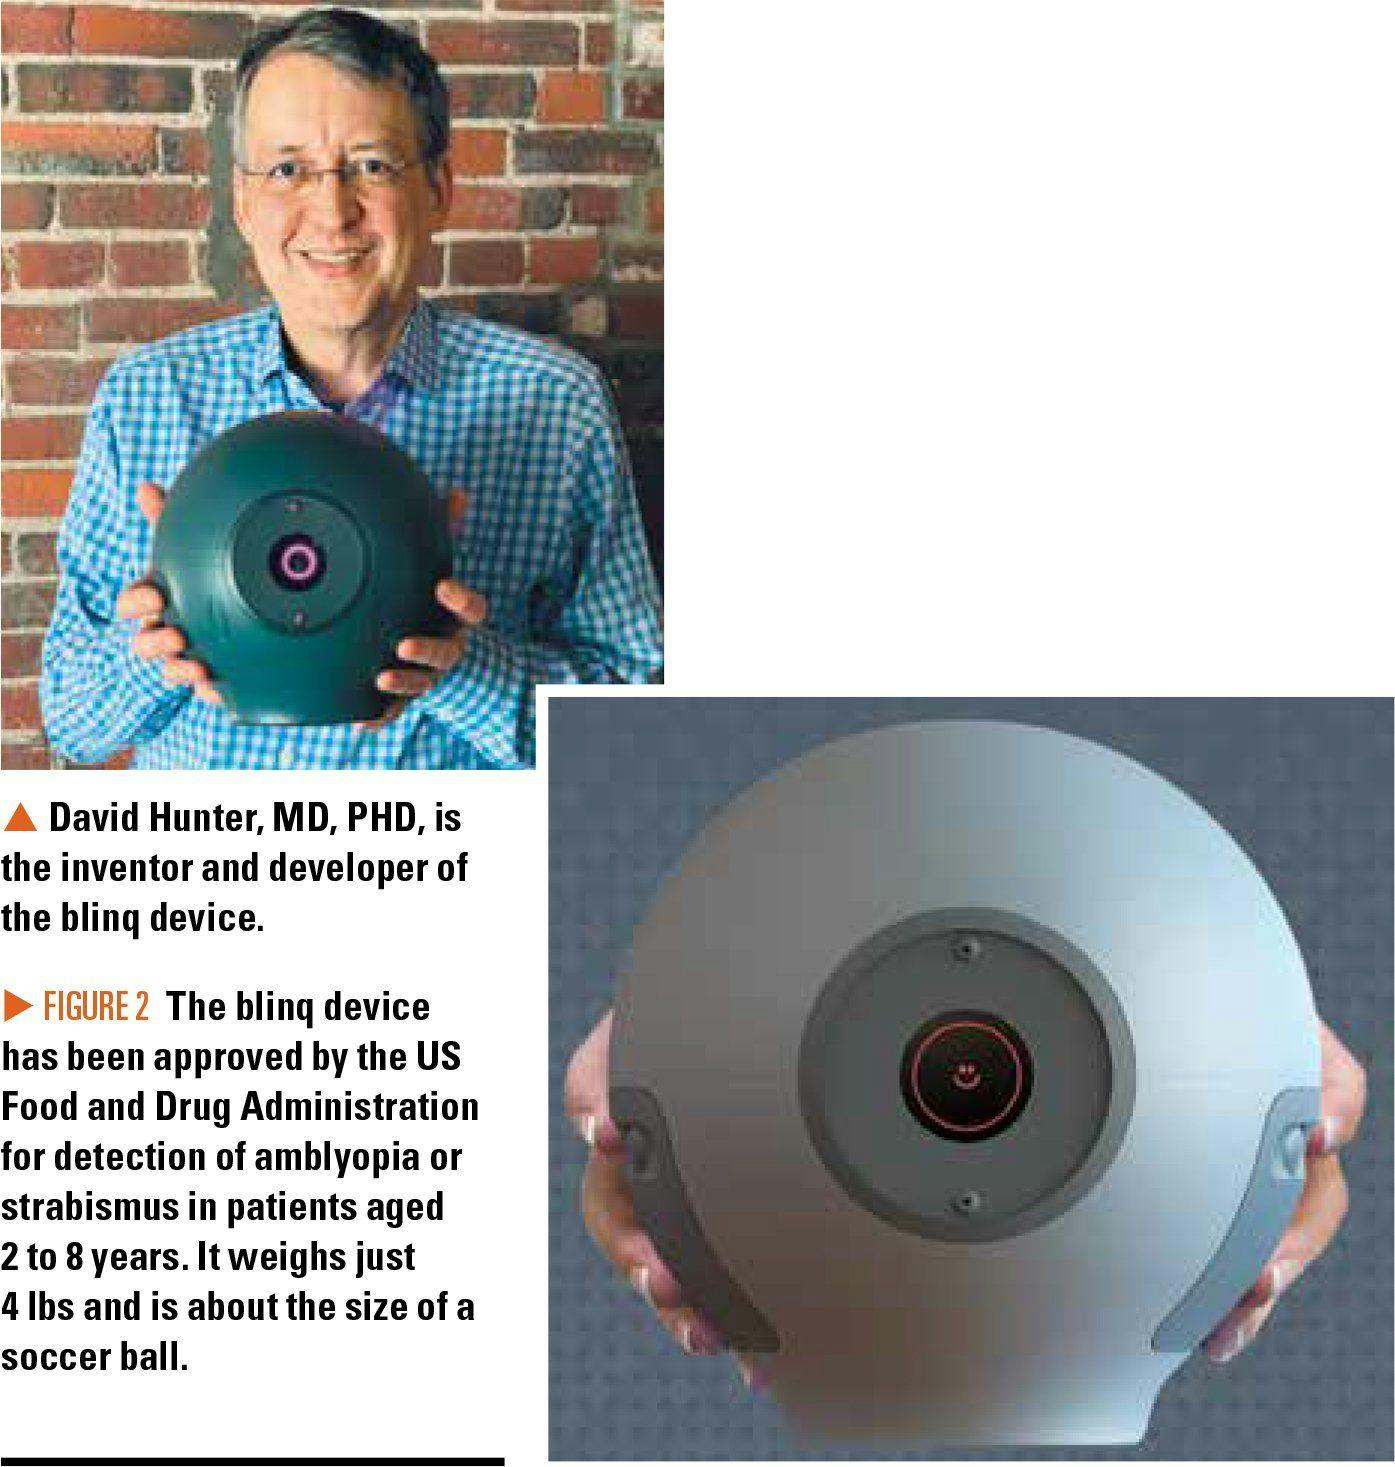 image of David Hunter, MD, PhD, and the blinq device